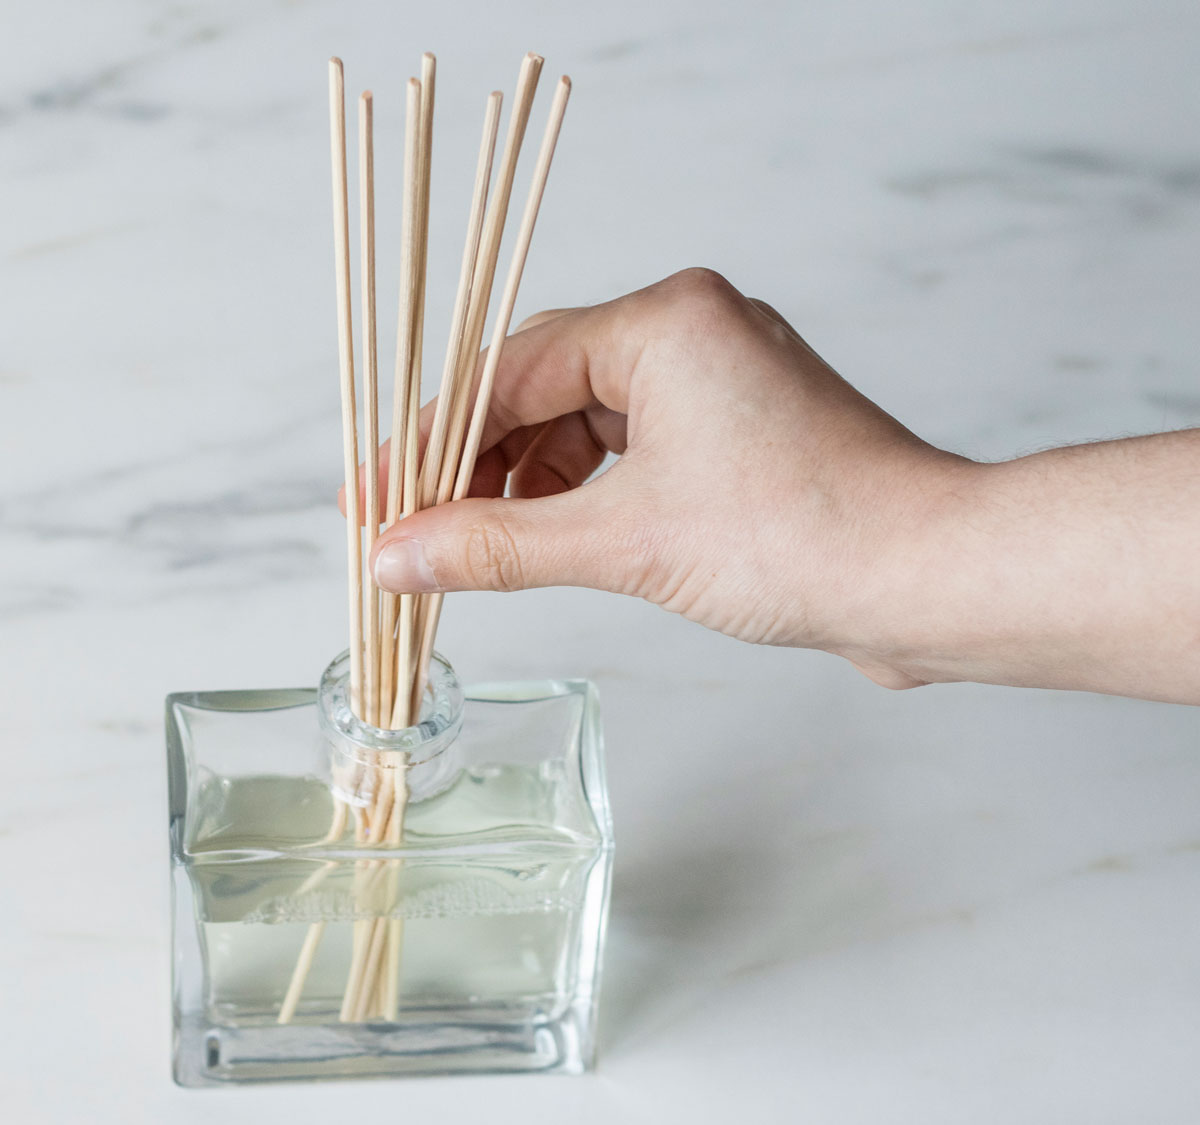 Add your reeds to the diffuser